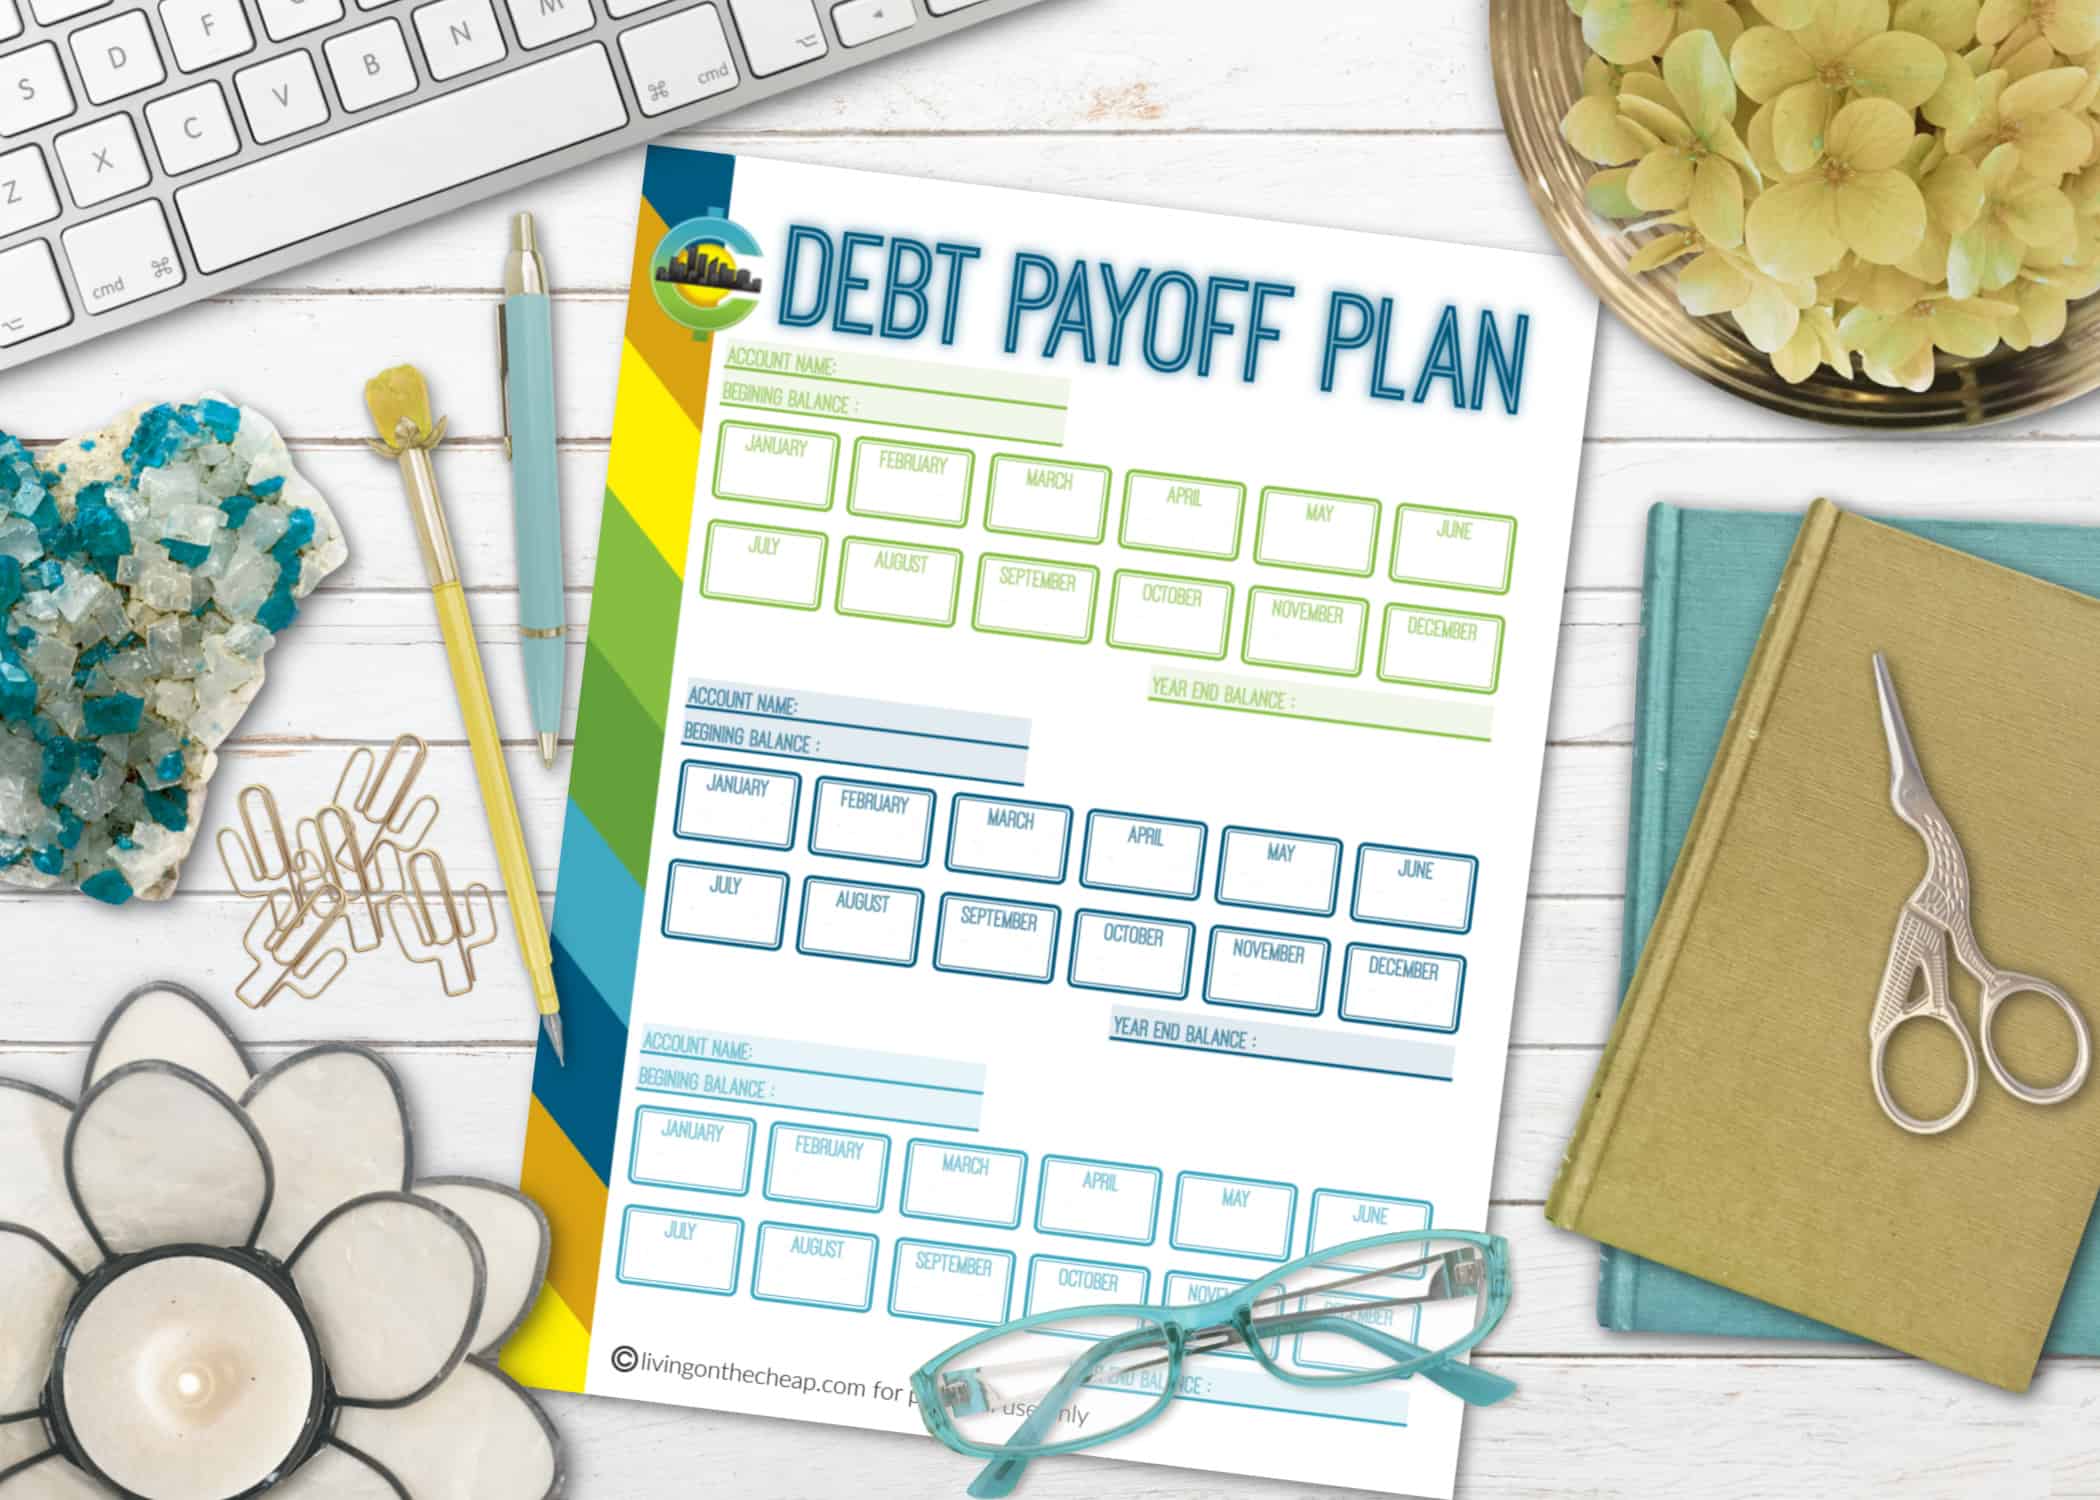 a paper with Debt Payoff Plan written on it with check boxes, next to a computer keyboard and reading glasses